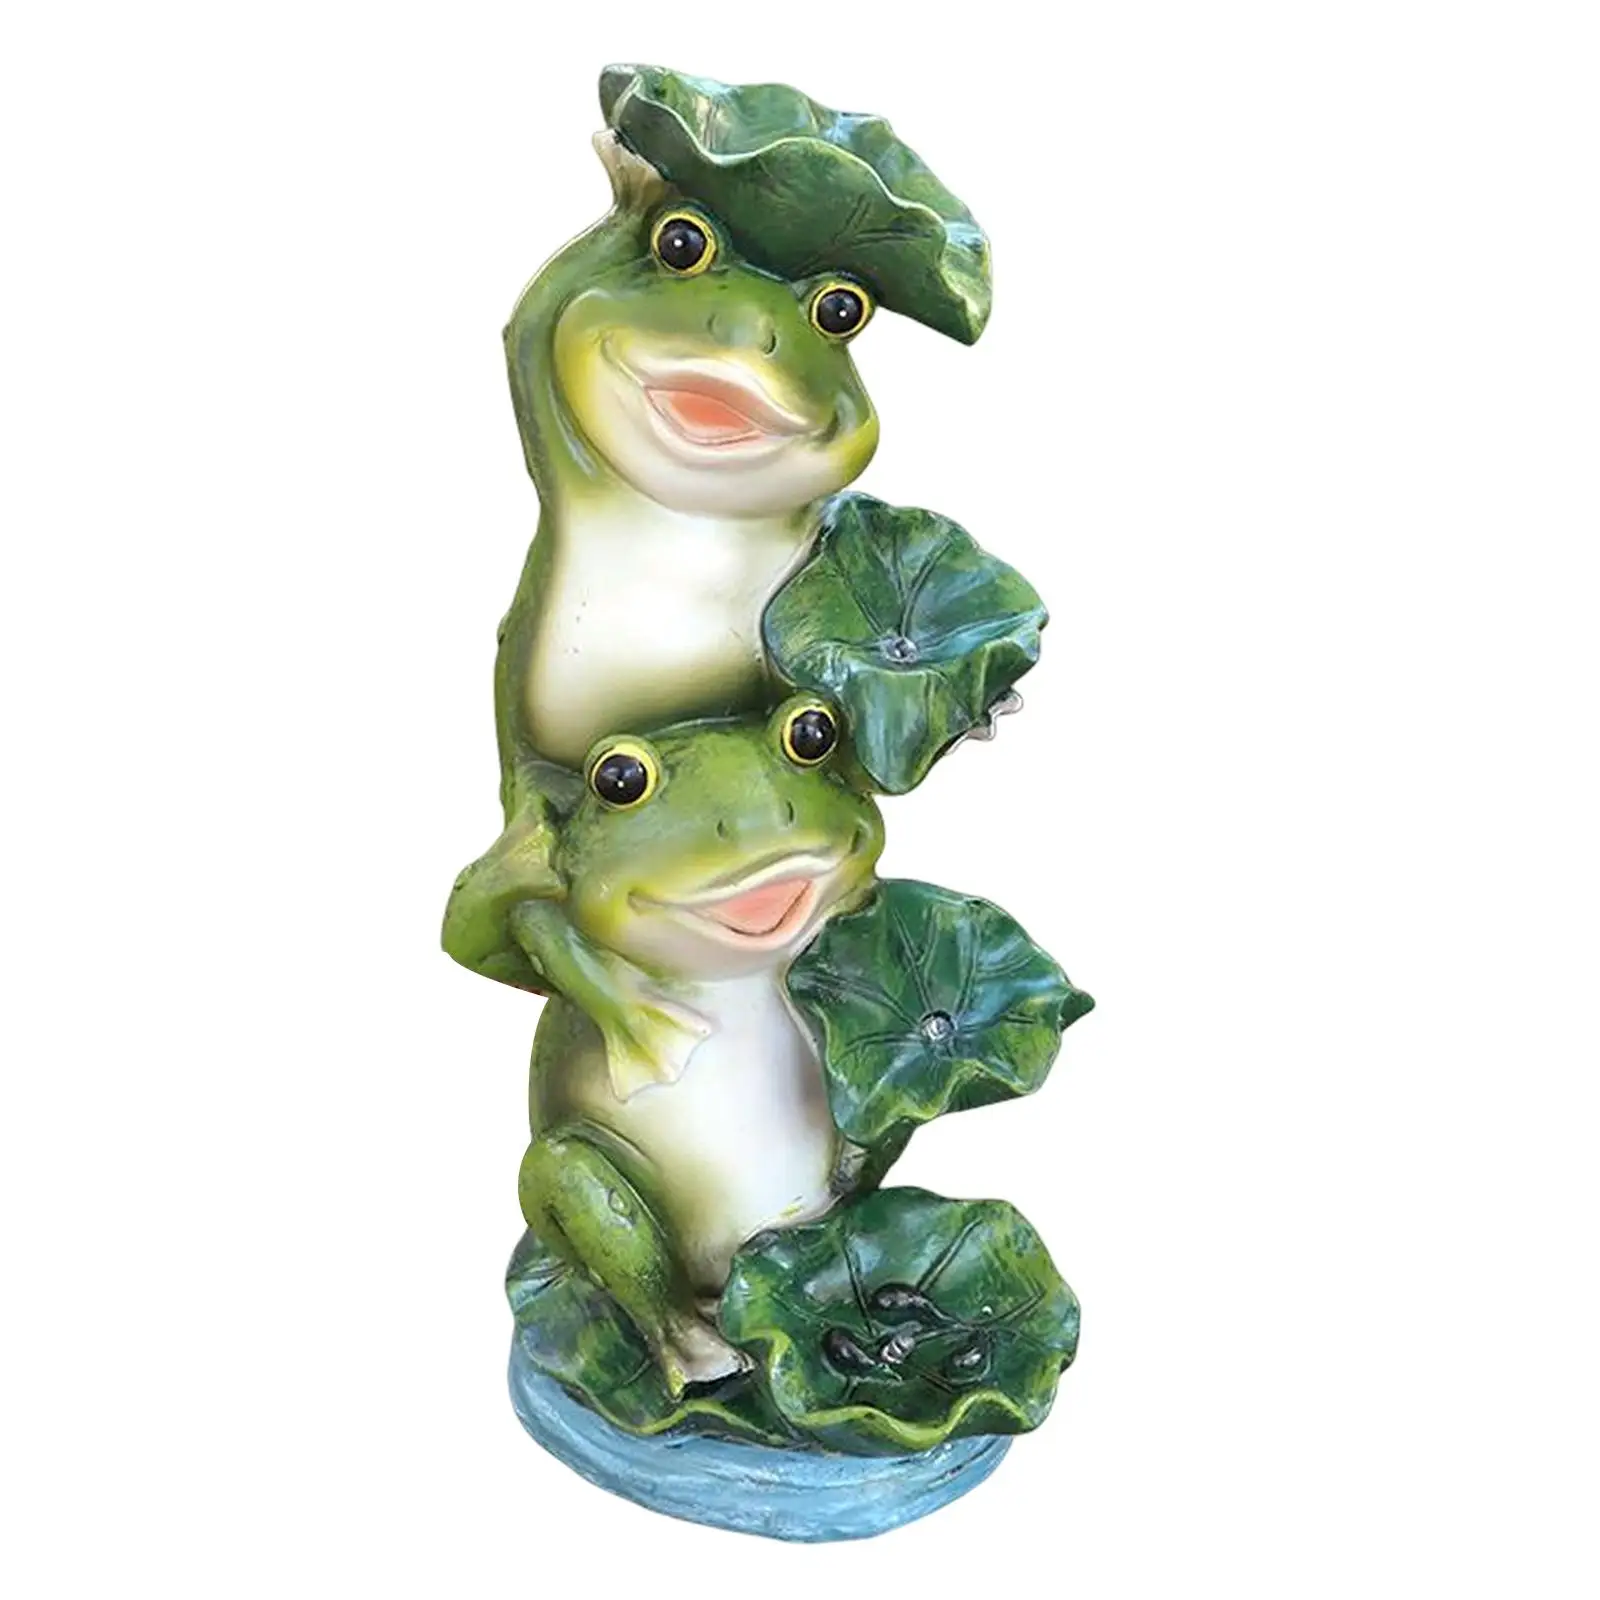 Outdoor Solar Powered Garden Lantern Garden Ornament Frog Figure Frogs Statue with Light for Lawn Yard Pathway Patio Decor